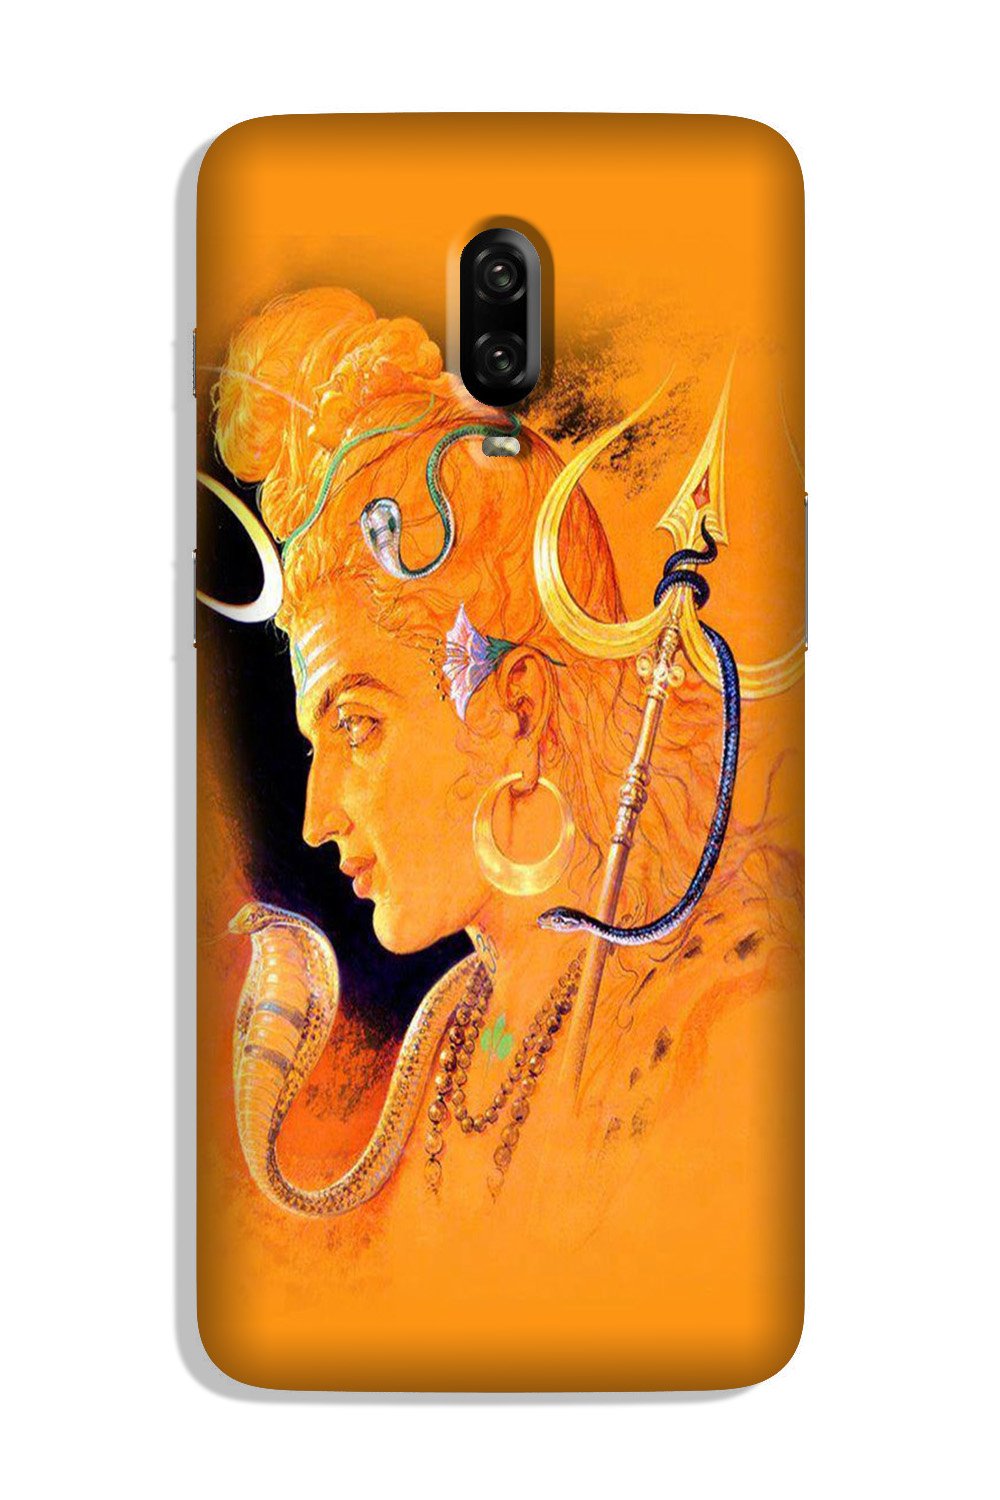 Lord Shiva Case for OnePlus 7 (Design No. 293)